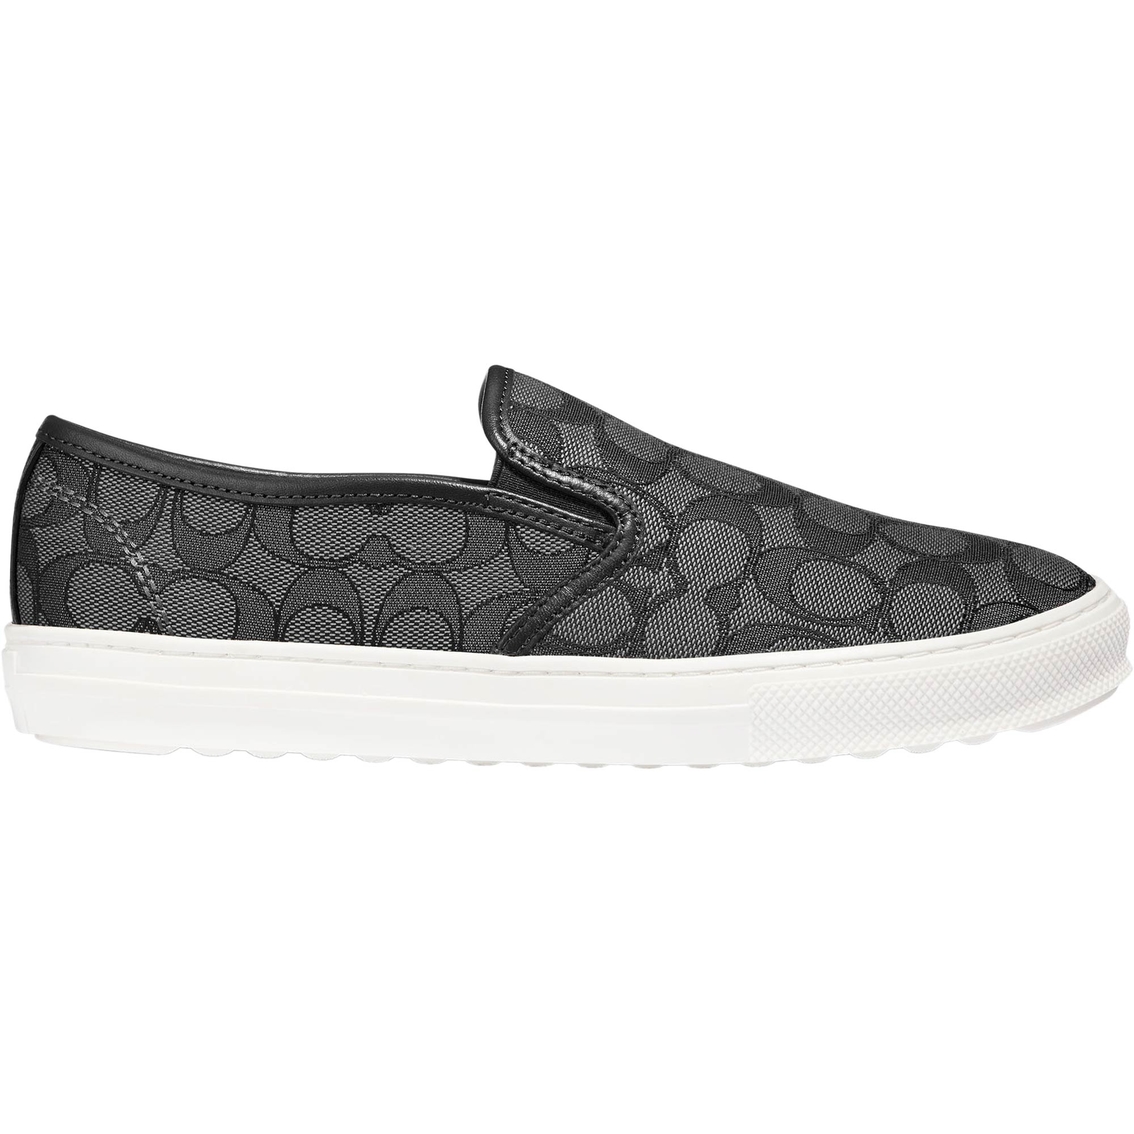 Coach Women's Signature Slip On Sneakers | Sneakers | Shoes | Shop The